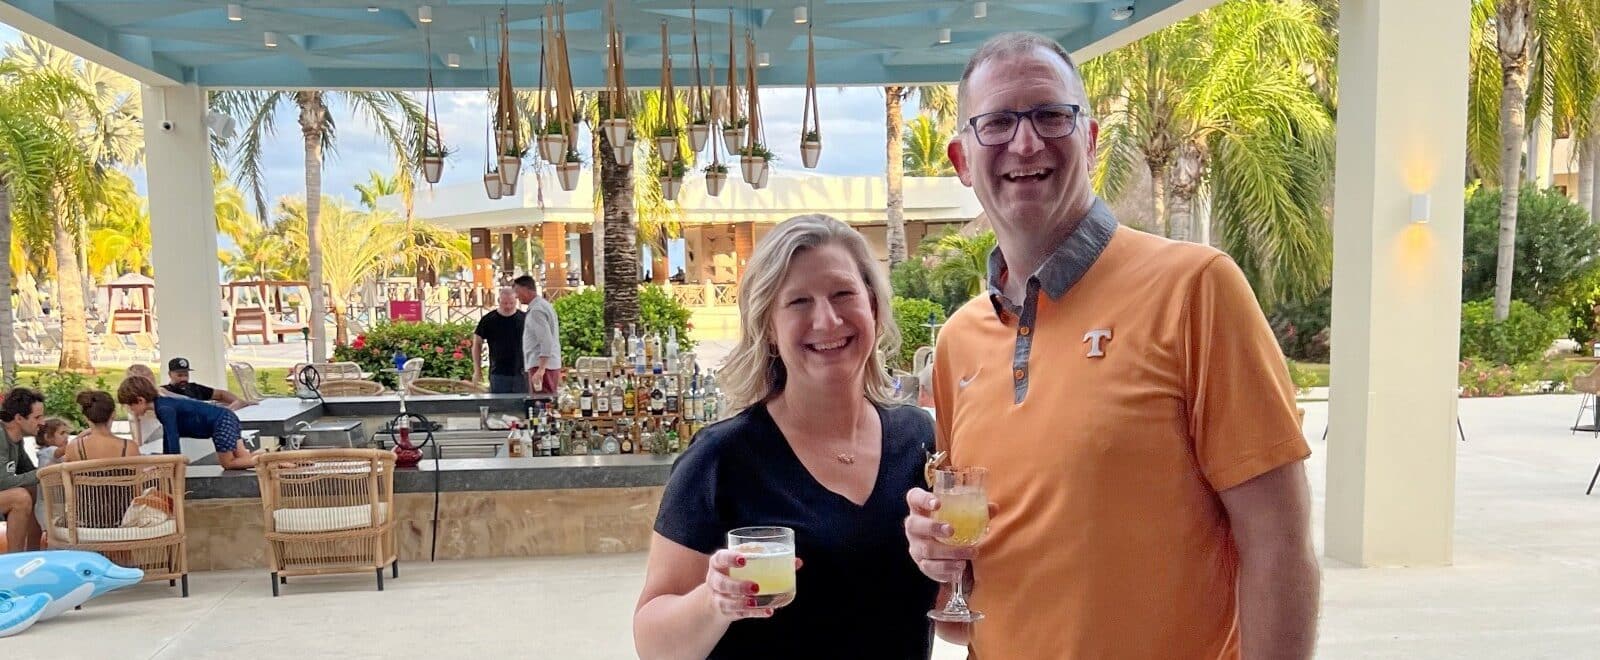 Ross and Zuzu with drinks at the Hyatt Ziva Riviera Cancun All Inclusive resort in Mexico